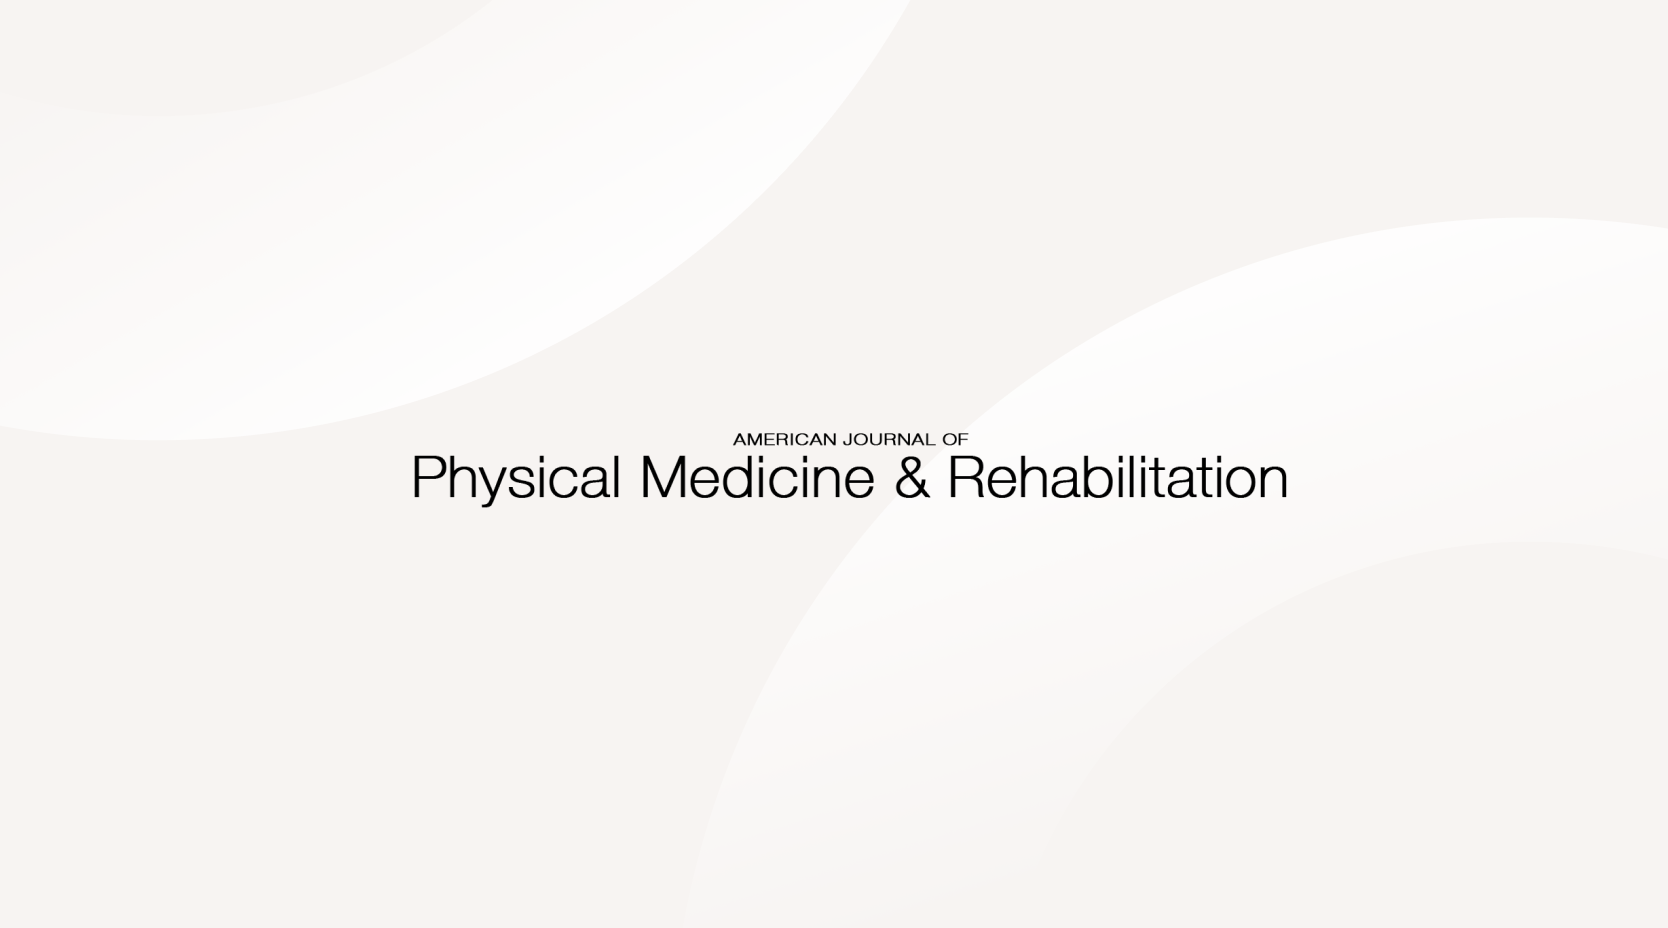  Digitally assisted vs conventional home-based rehabilitation after arthroscopic rotator cuff repair